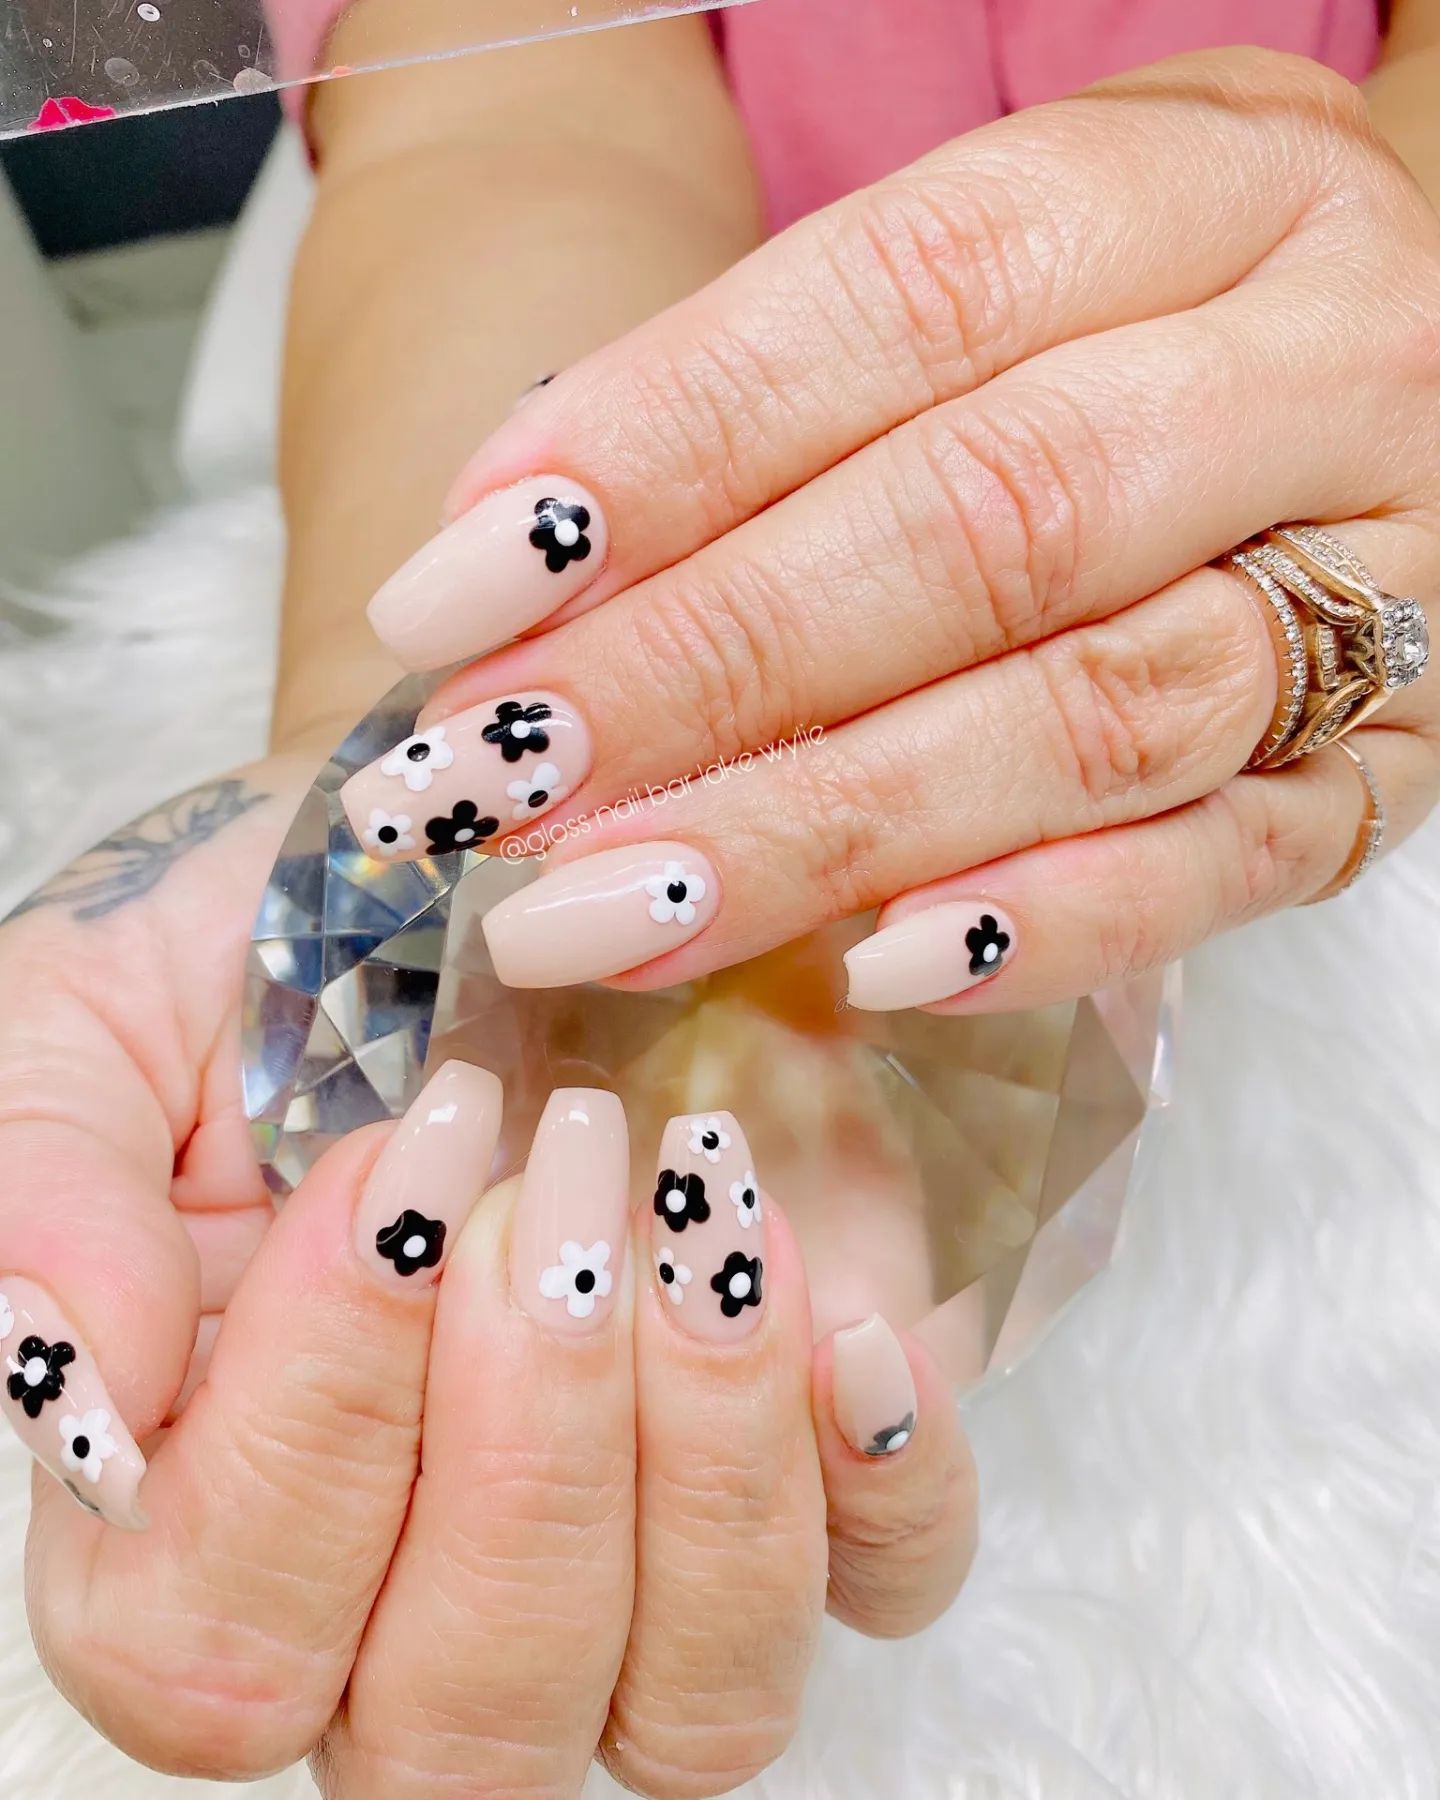  These nails are fresh as a daisy! Not all daisy nail arts have to be colorful. You can have black and white daisy nails.